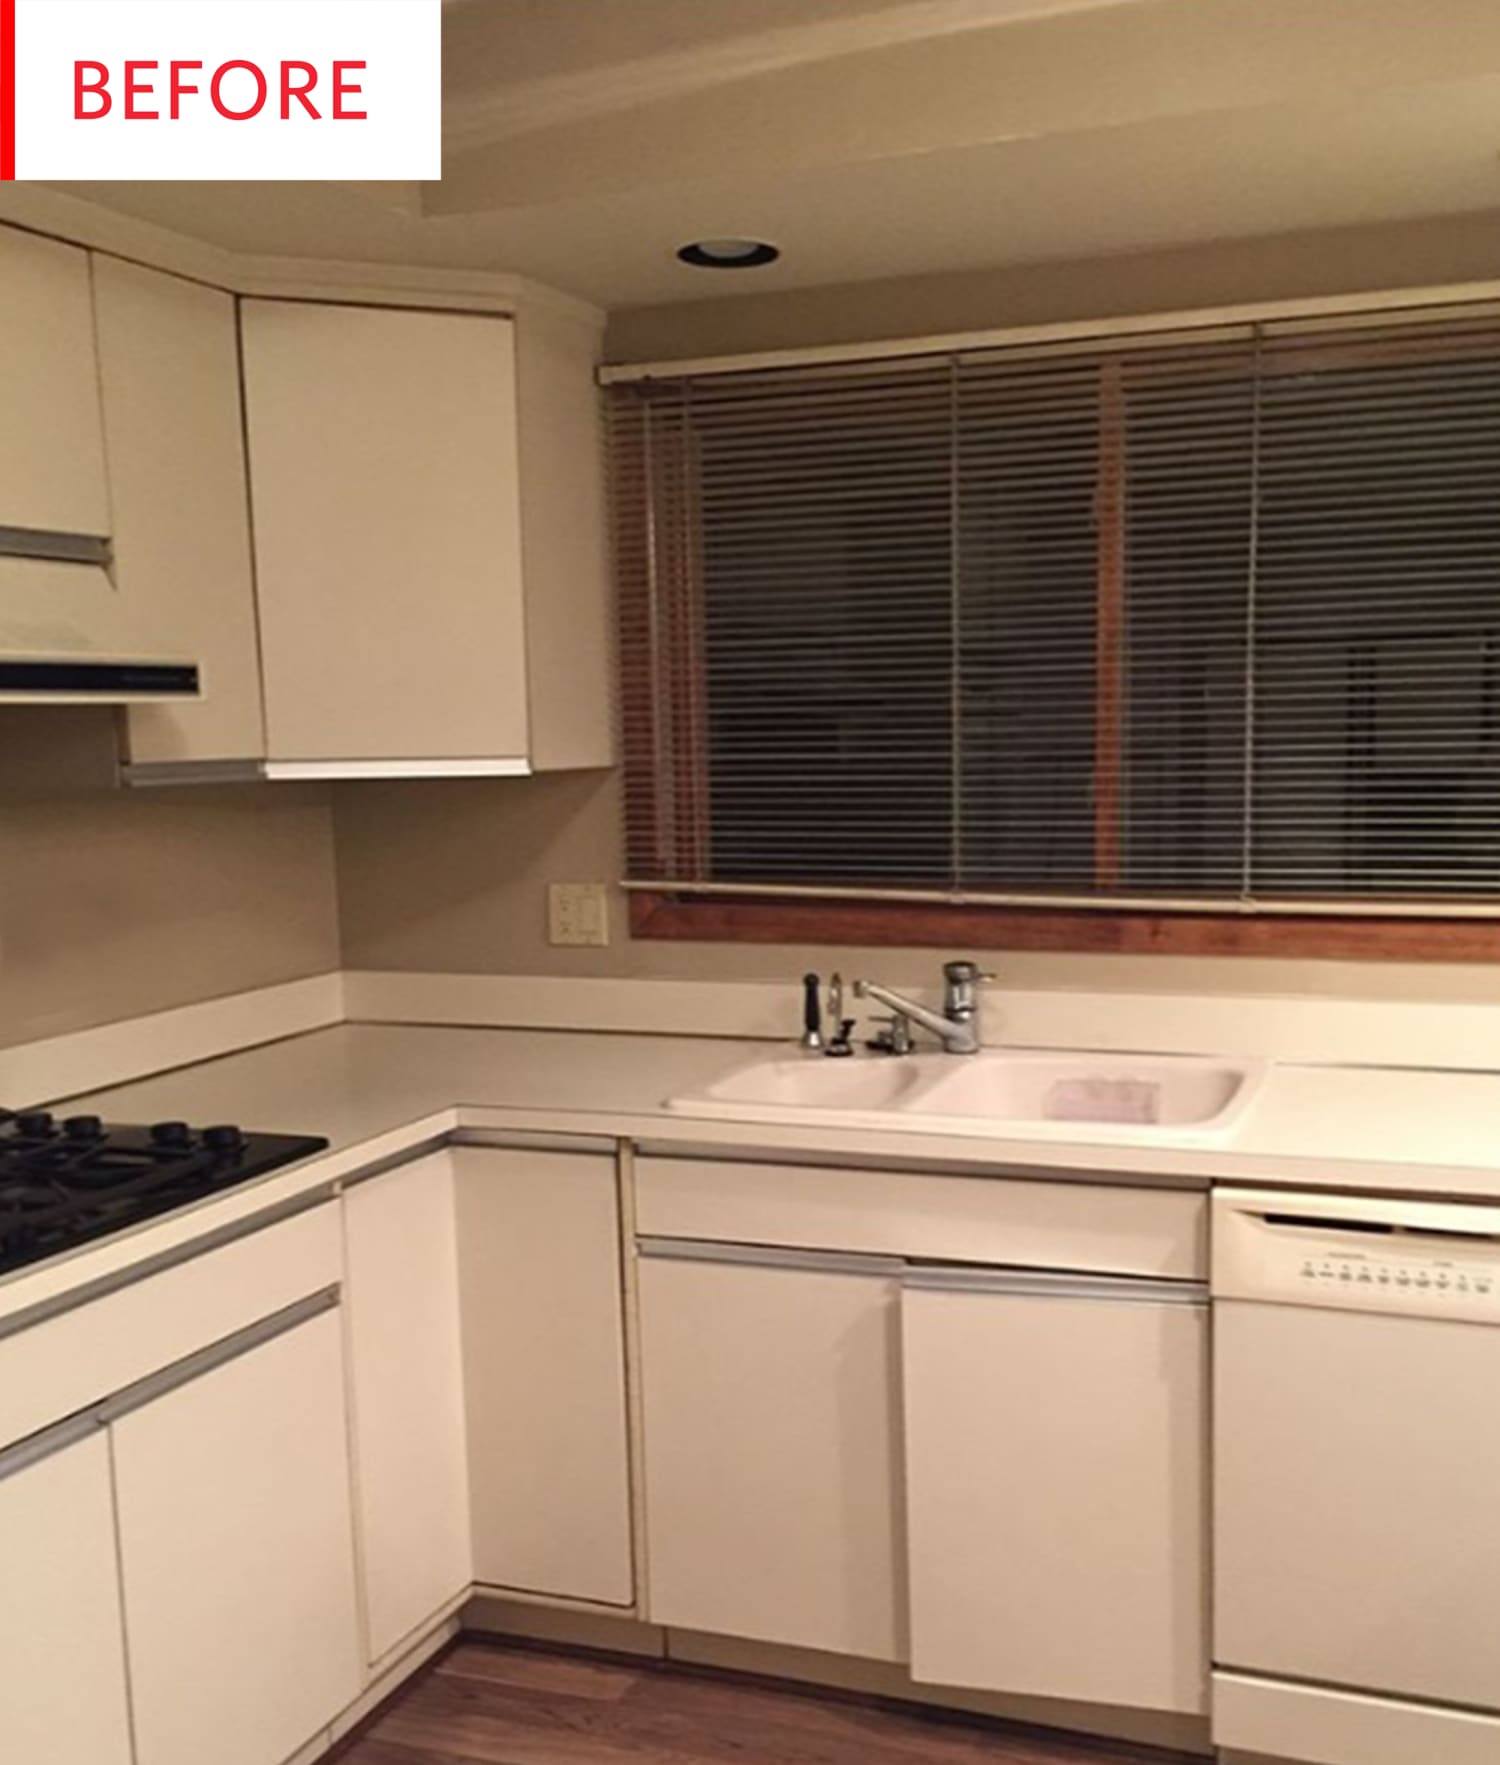 Before and After: IKEA Brings Some Drama to This Newly Remodeled Kitchen